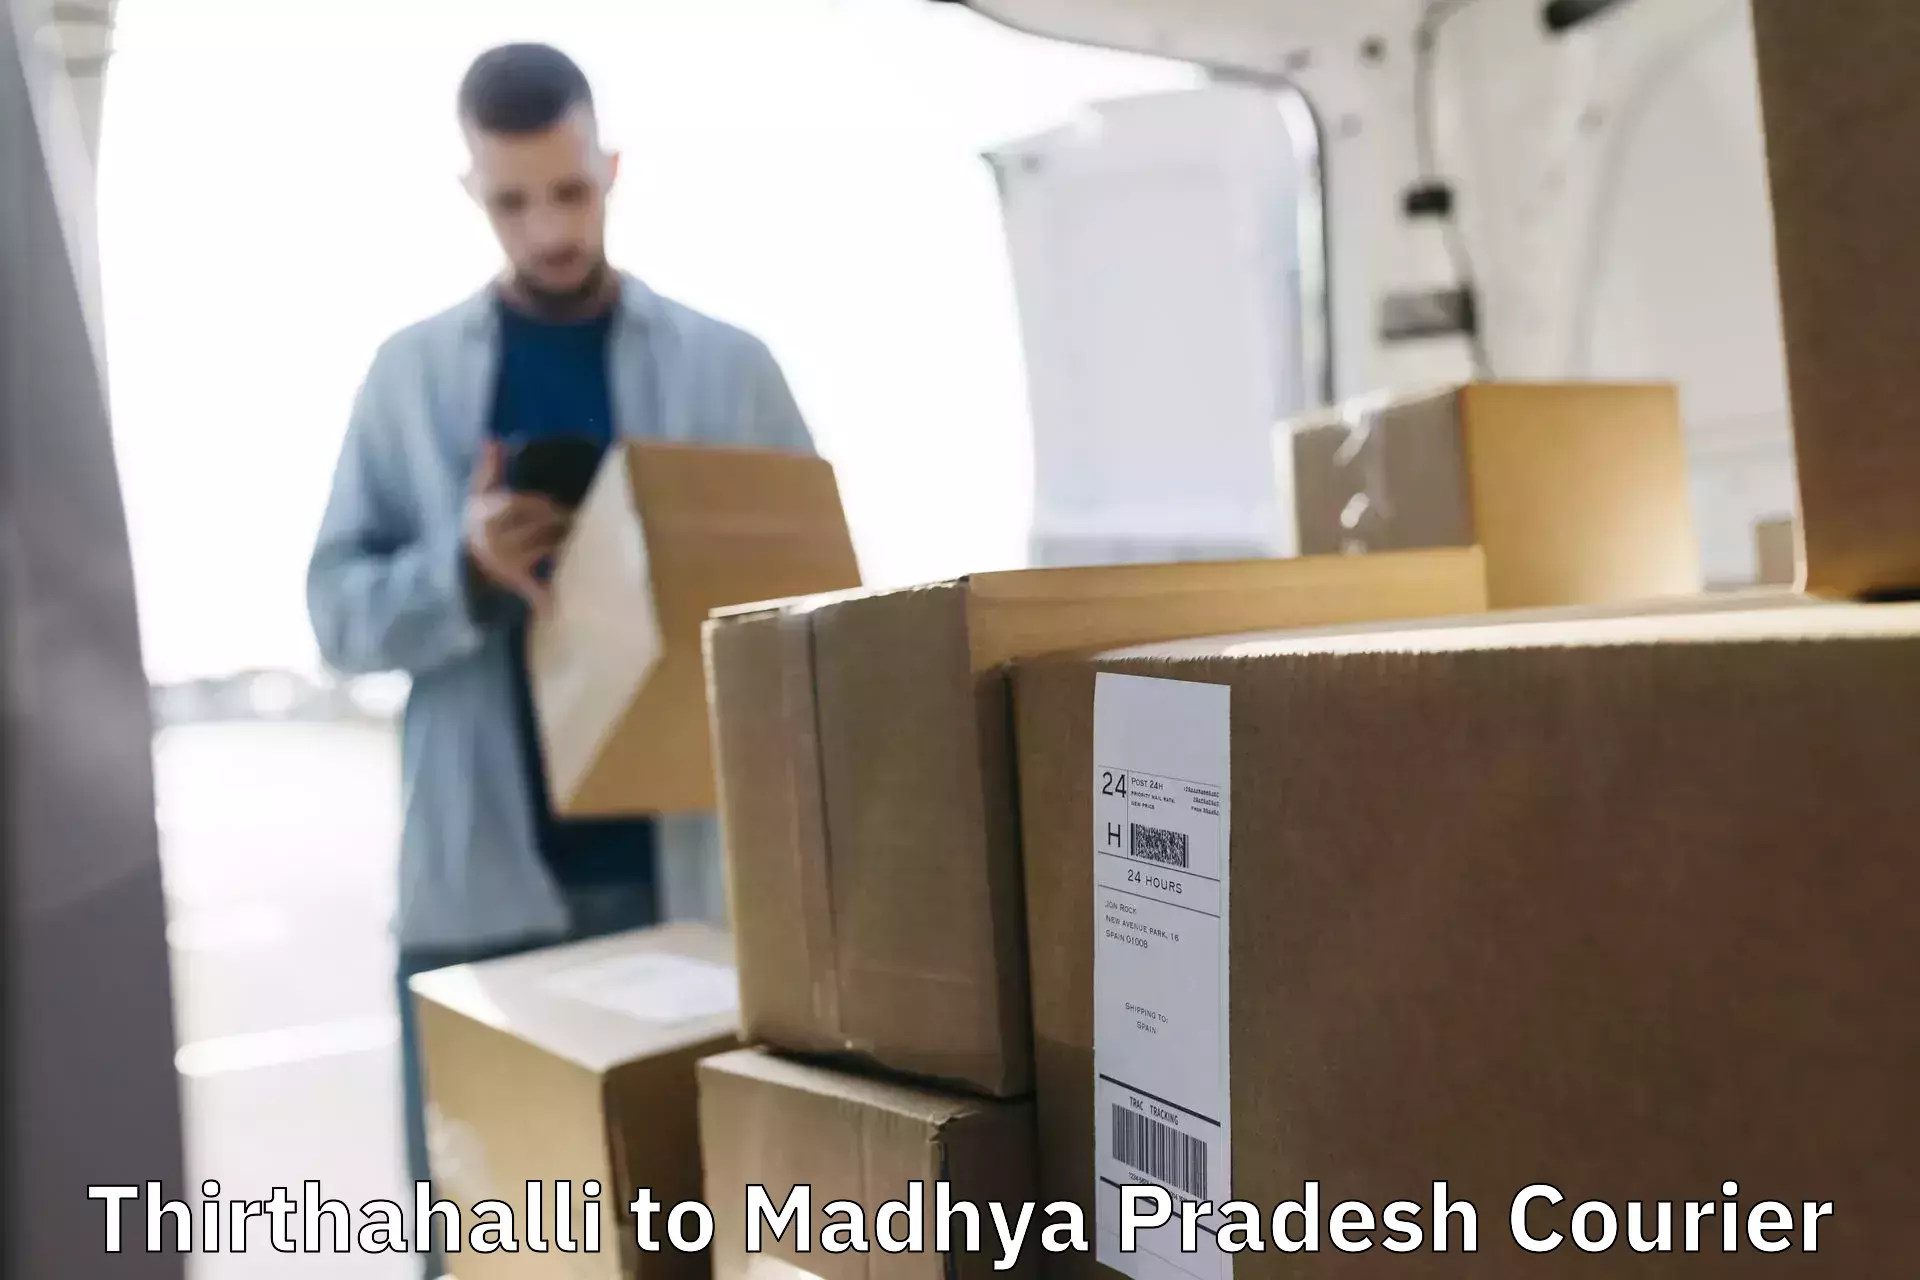 Automated parcel services Thirthahalli to Shajapur